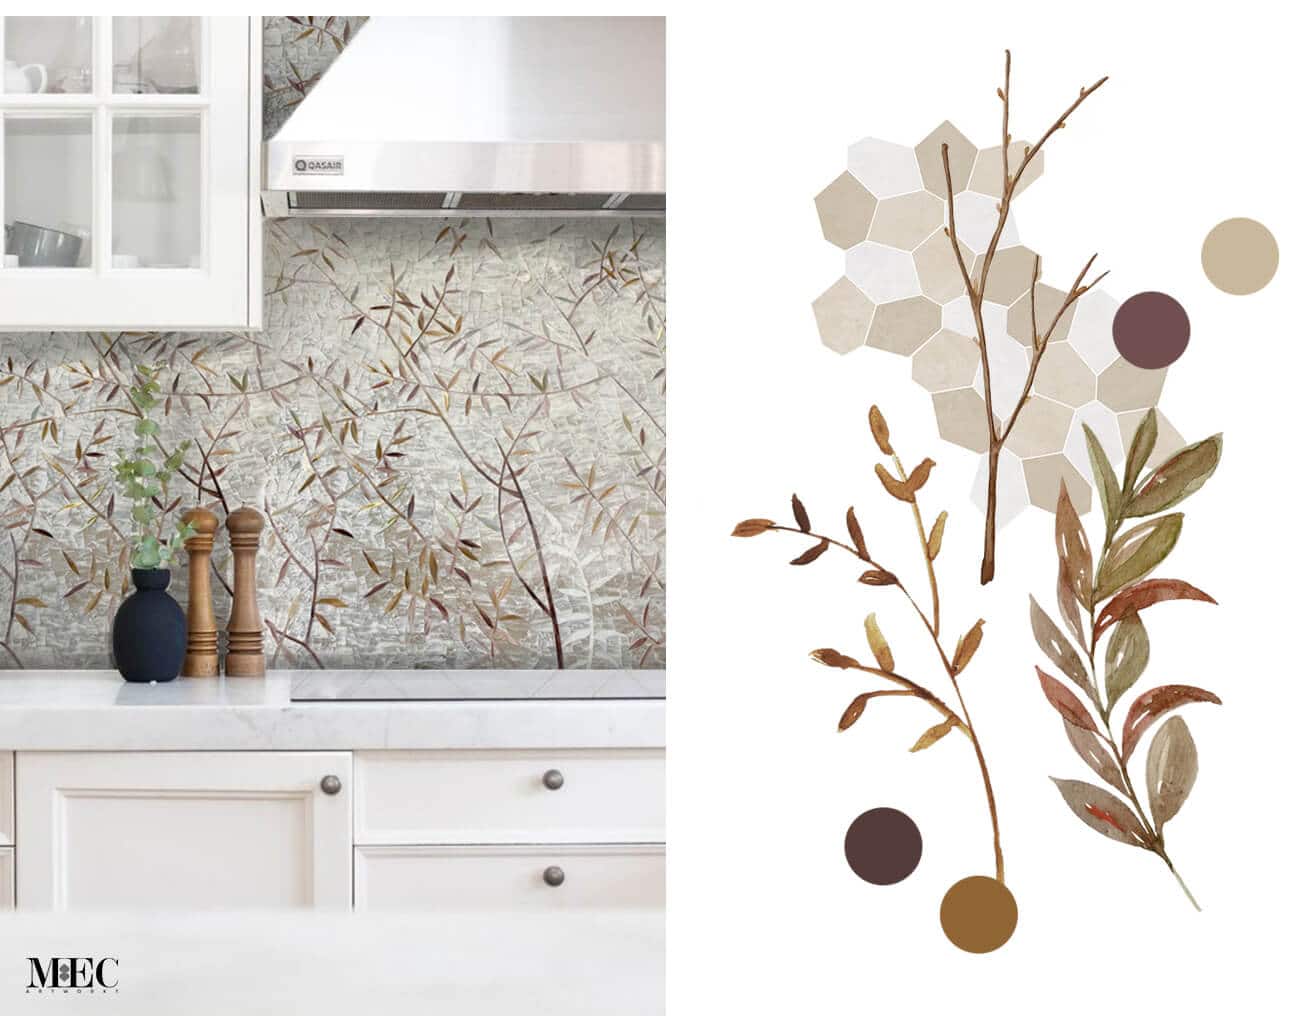 a mosaic tile kitchen backsplash design with delicate tree branches and leaves featuring a brown and white palette